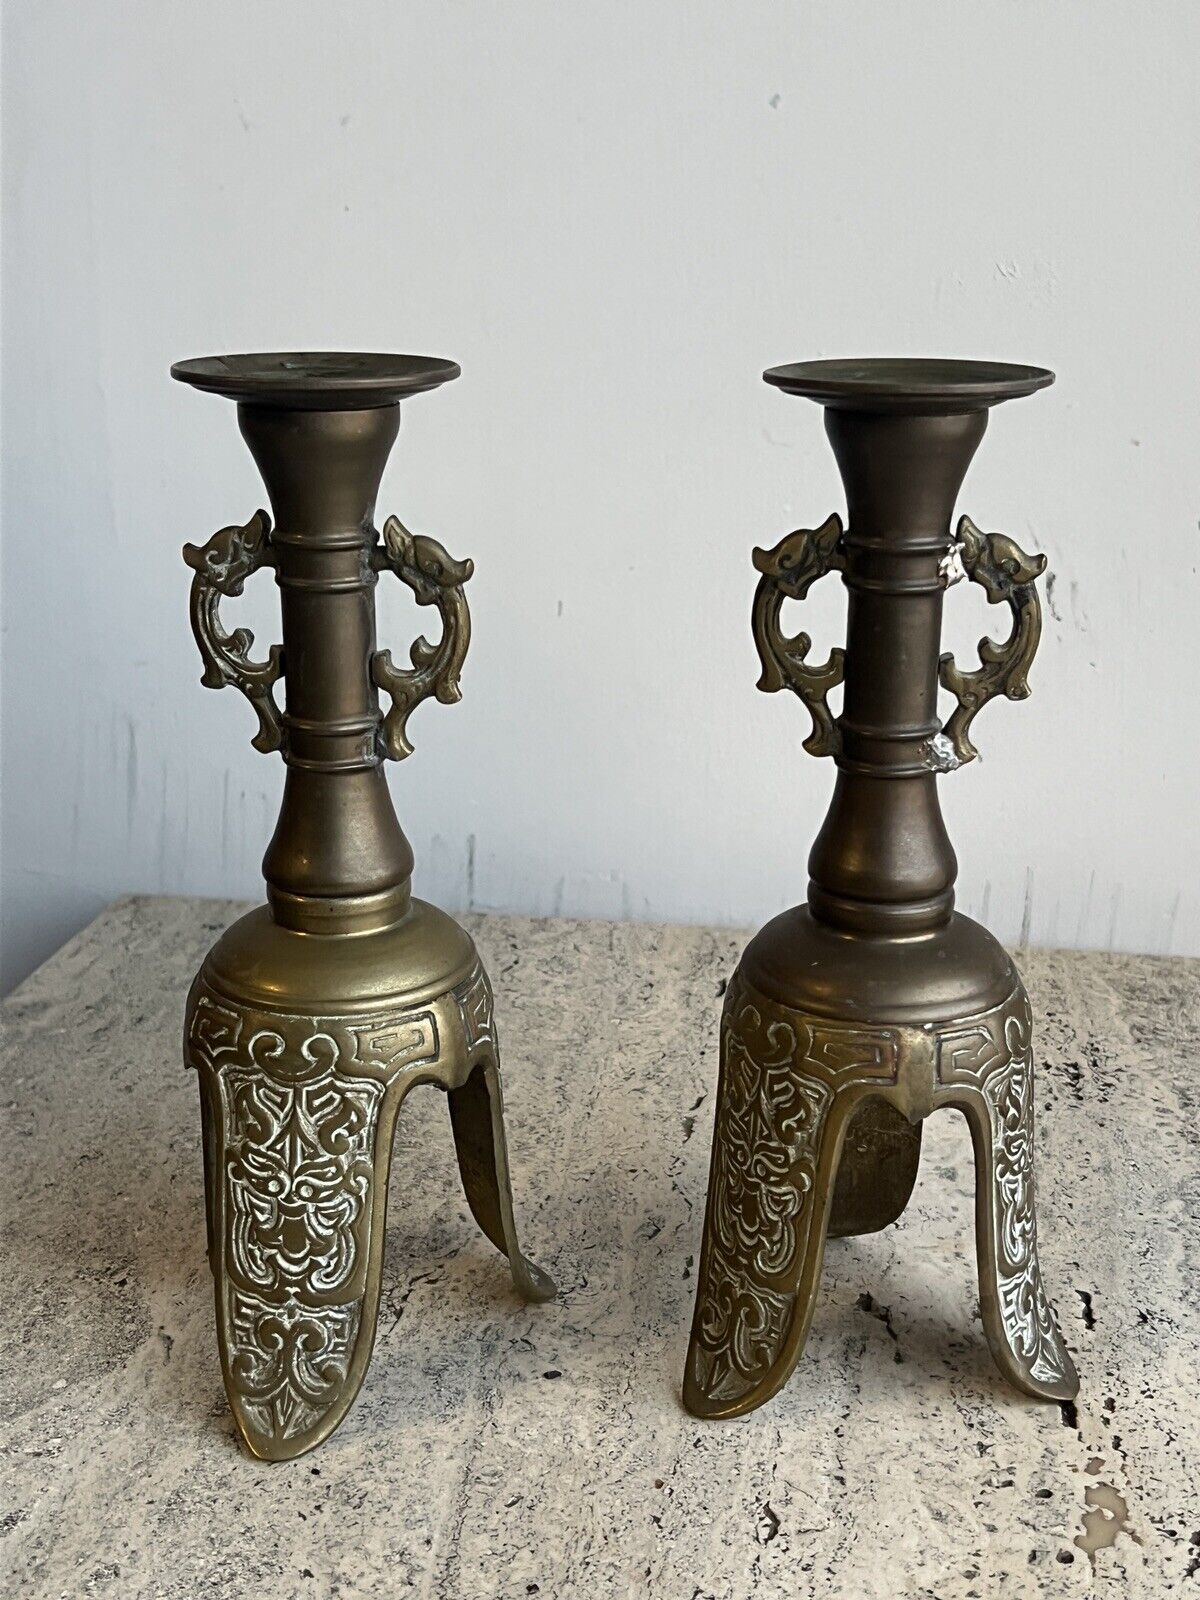 Vintage Pair of Ornate Brass Candle Holders